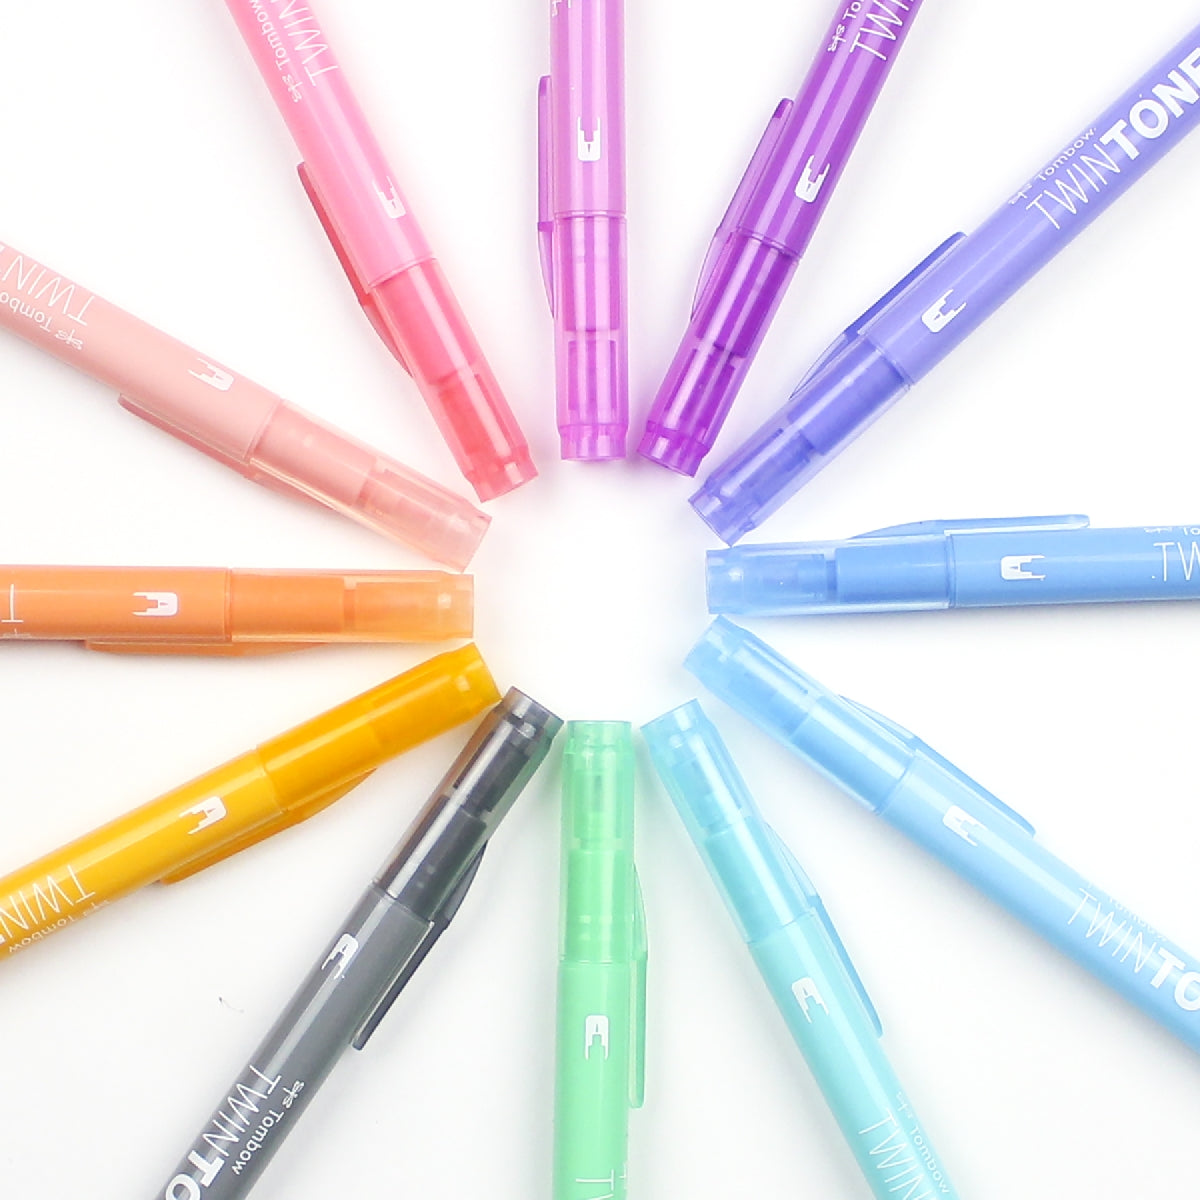 Tombow TwinTone Dual Tip Markers - Pastel 12 pack